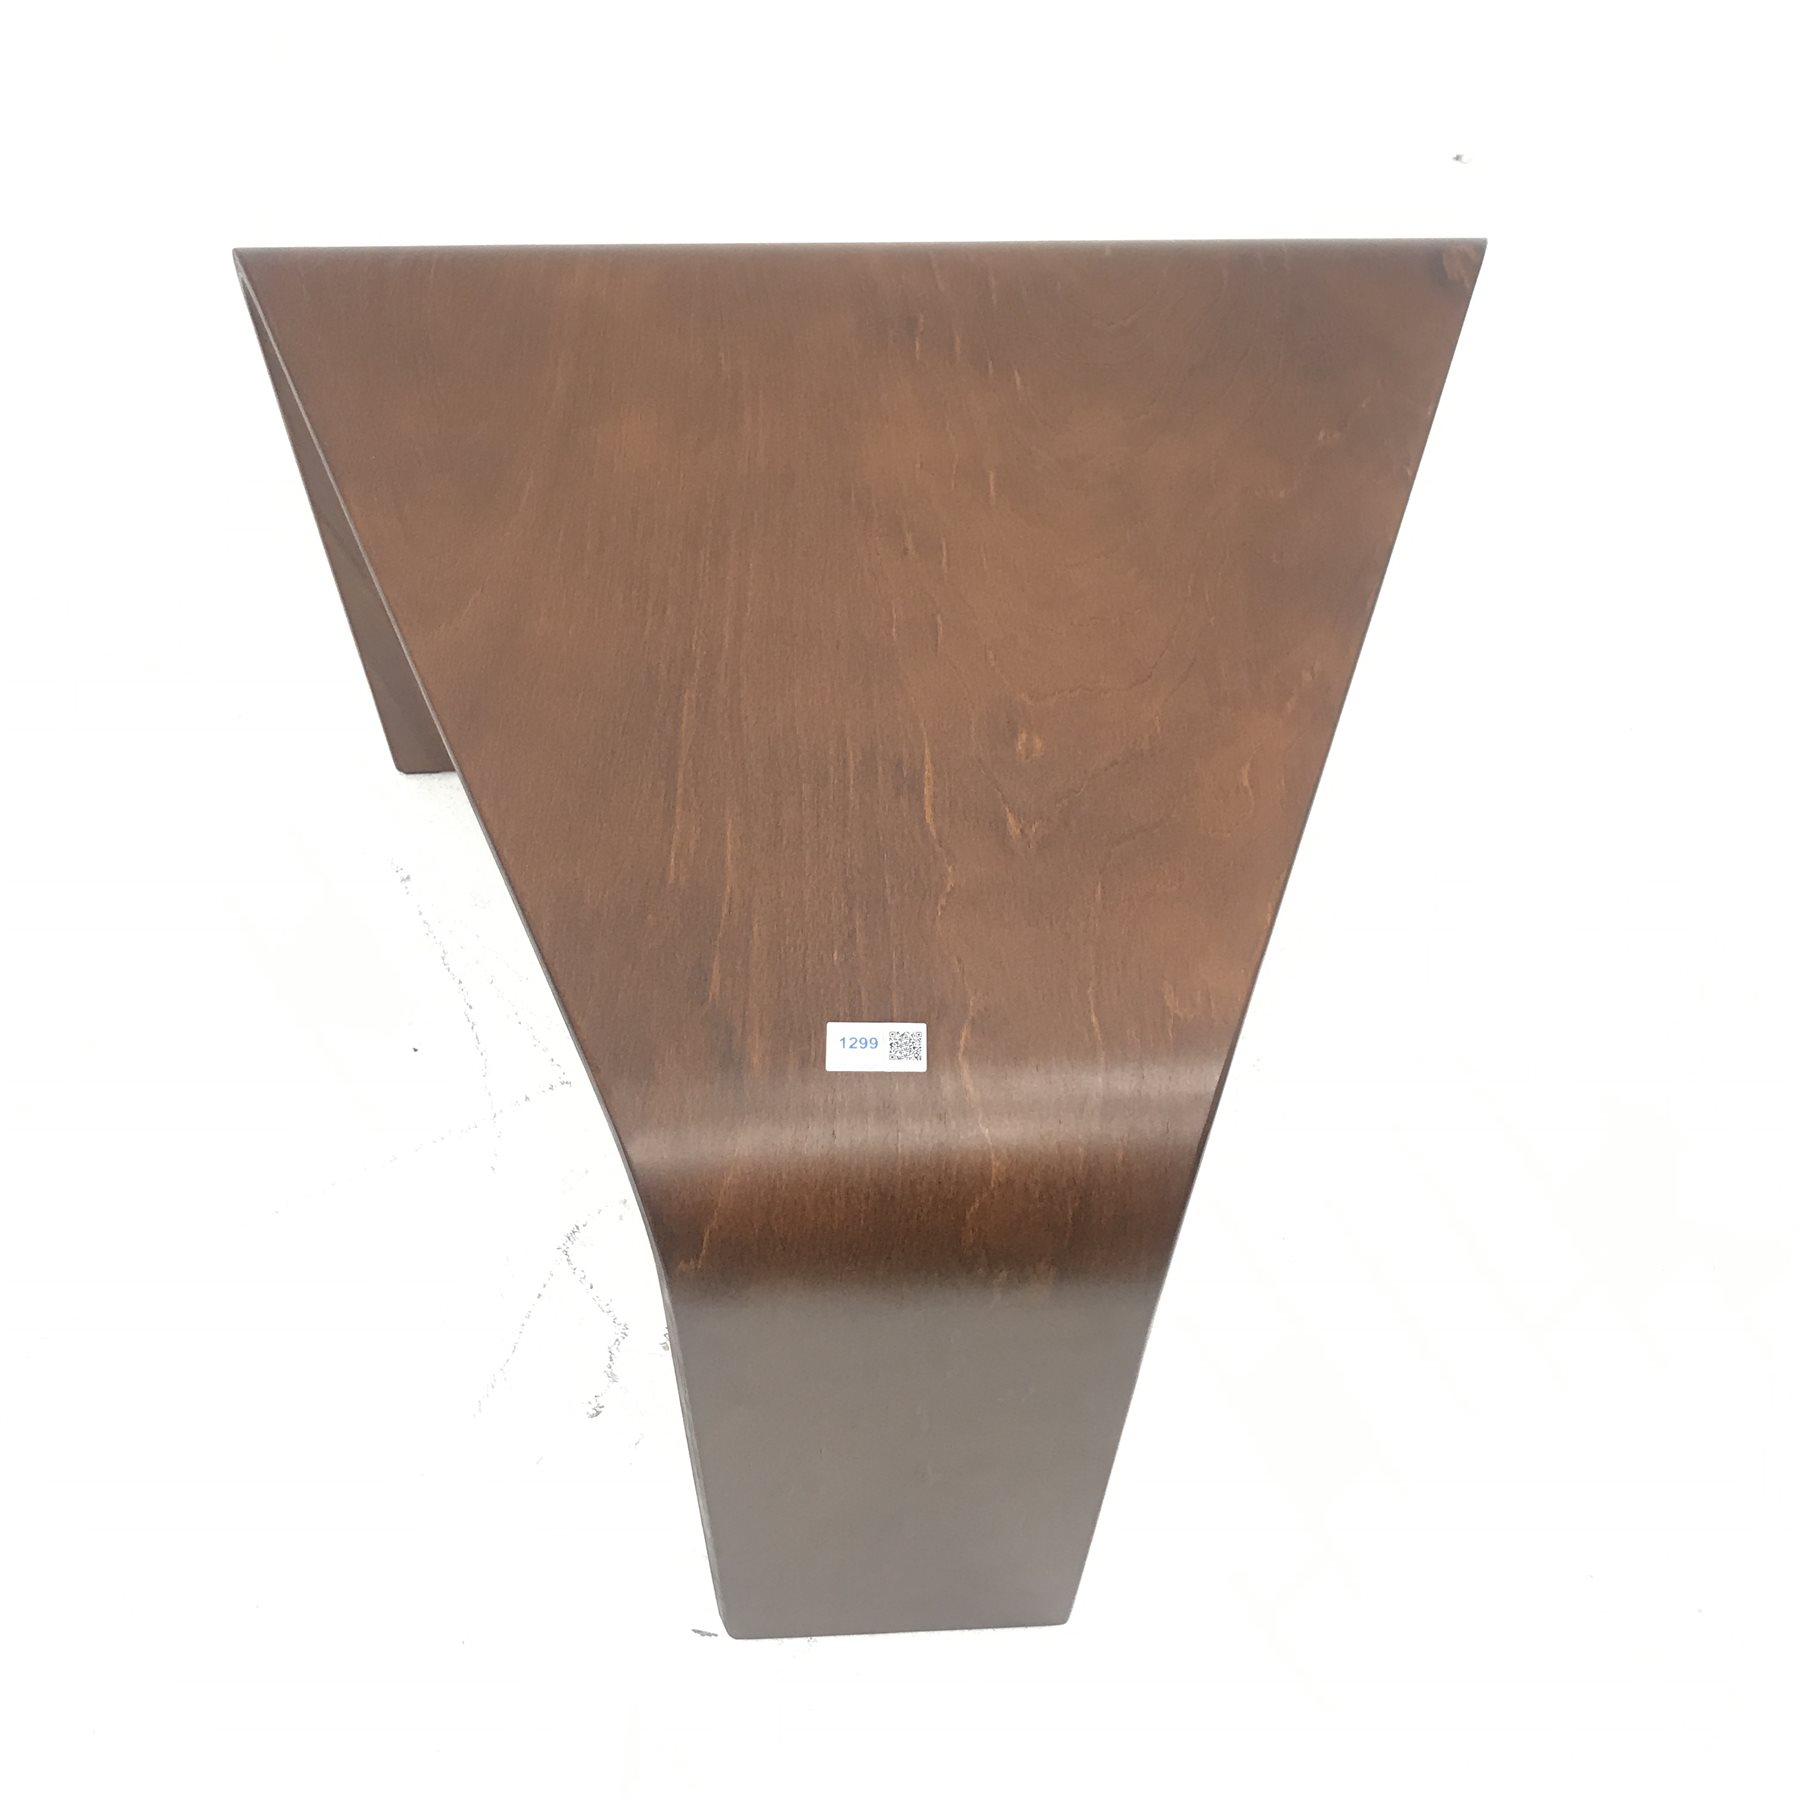 Stressless corner table, shaped supports, W69cm, H48cm, D60cm - Image 2 of 2